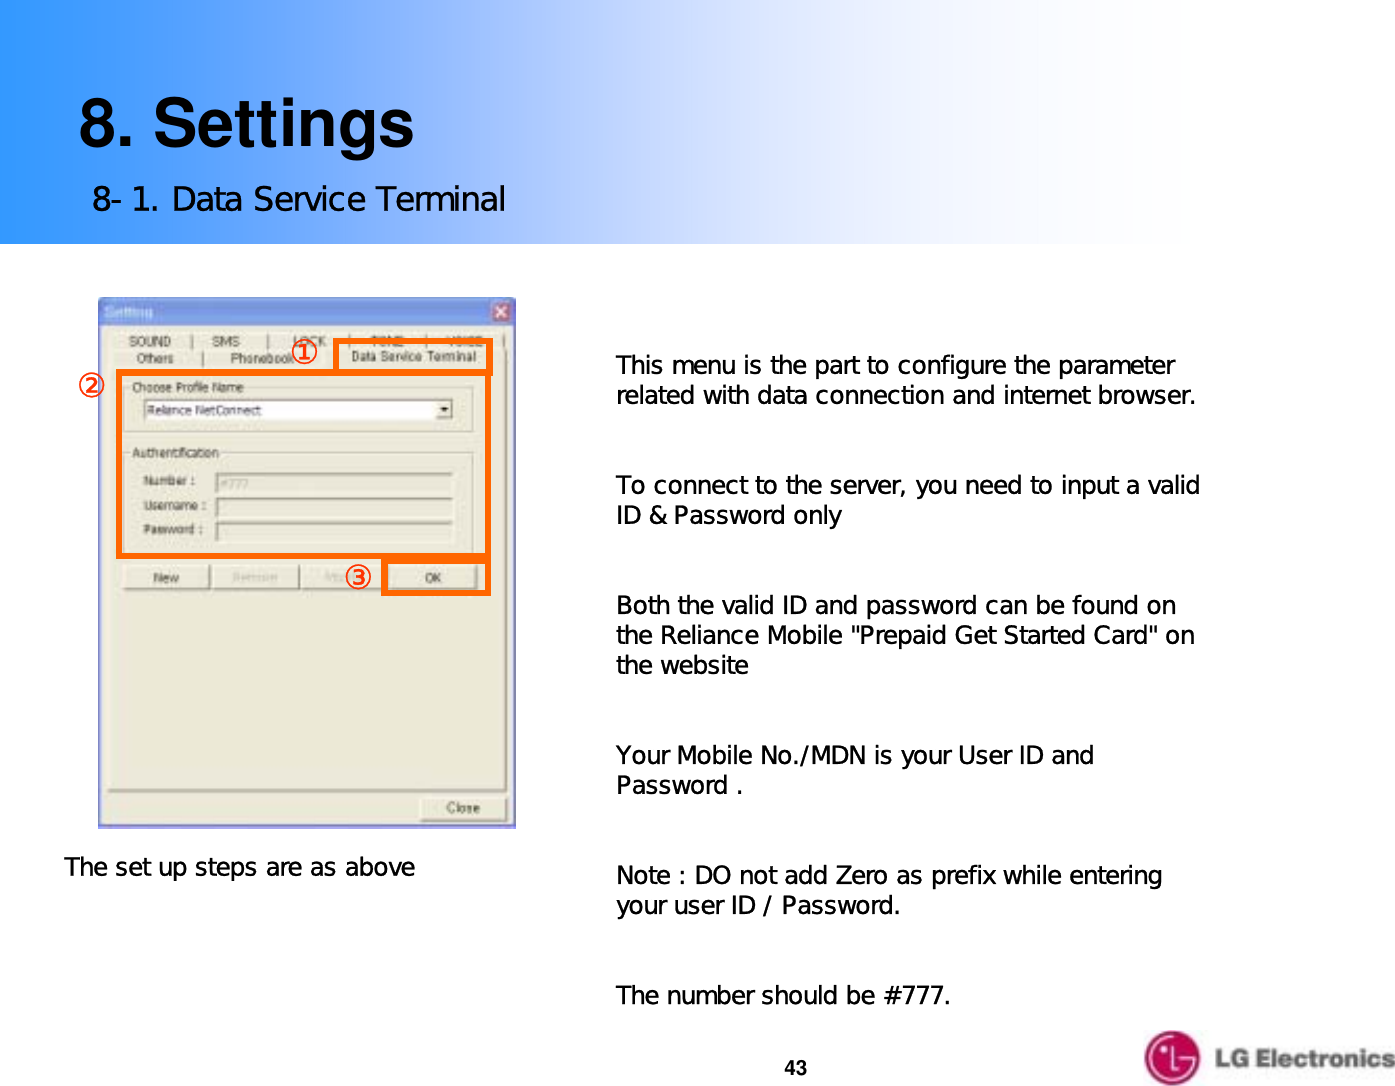 438. Settings8-1. Data Service Terminal③②①The set up steps are as aboveThis menu is the part to configure the parameter related with data connection and internet browser. To connect to the server, you need to input a valid             ID &amp; Password only  Both the valid ID and password can be found on the Reliance Mobile &quot;Prepaid Get Started Card&quot; on the website  Your Mobile No./MDN is your User ID and Password .Note : DO not add Zero as prefix while entering your user ID / Password.The number should be #777.